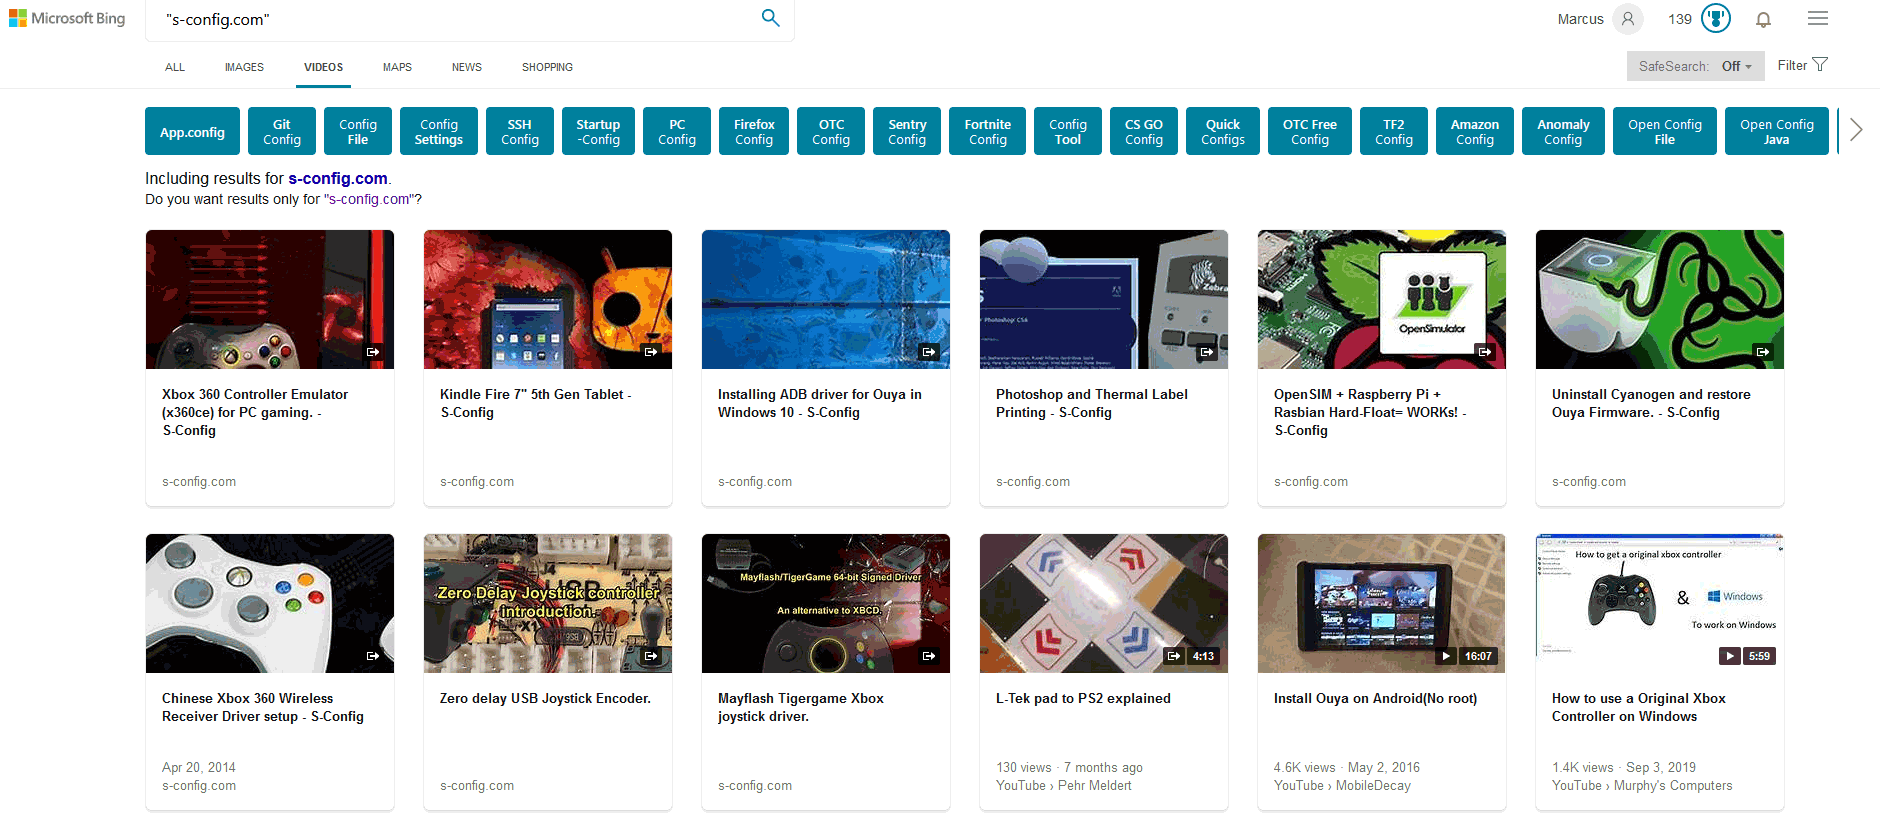 Bing Video results for S-Config.com - SafeSearch off this time.